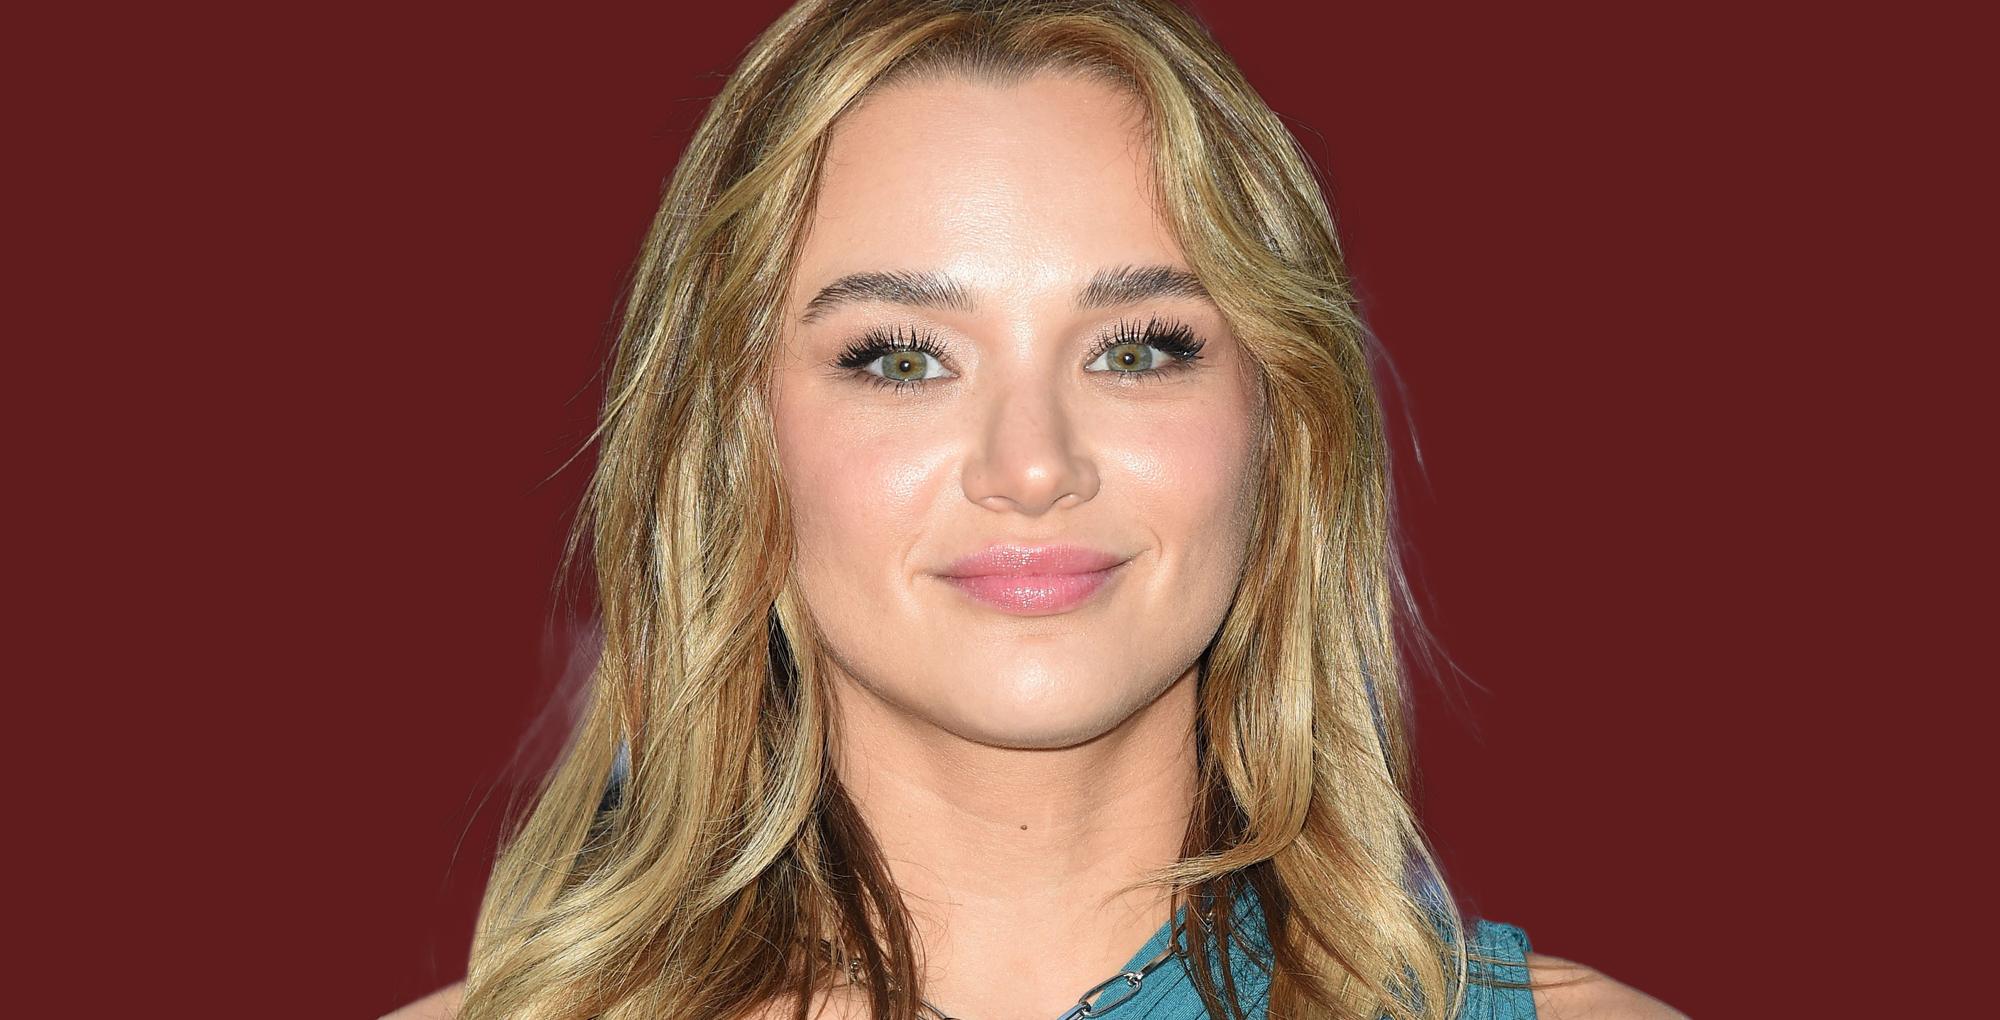 hunter king played summer on the young and the restless.